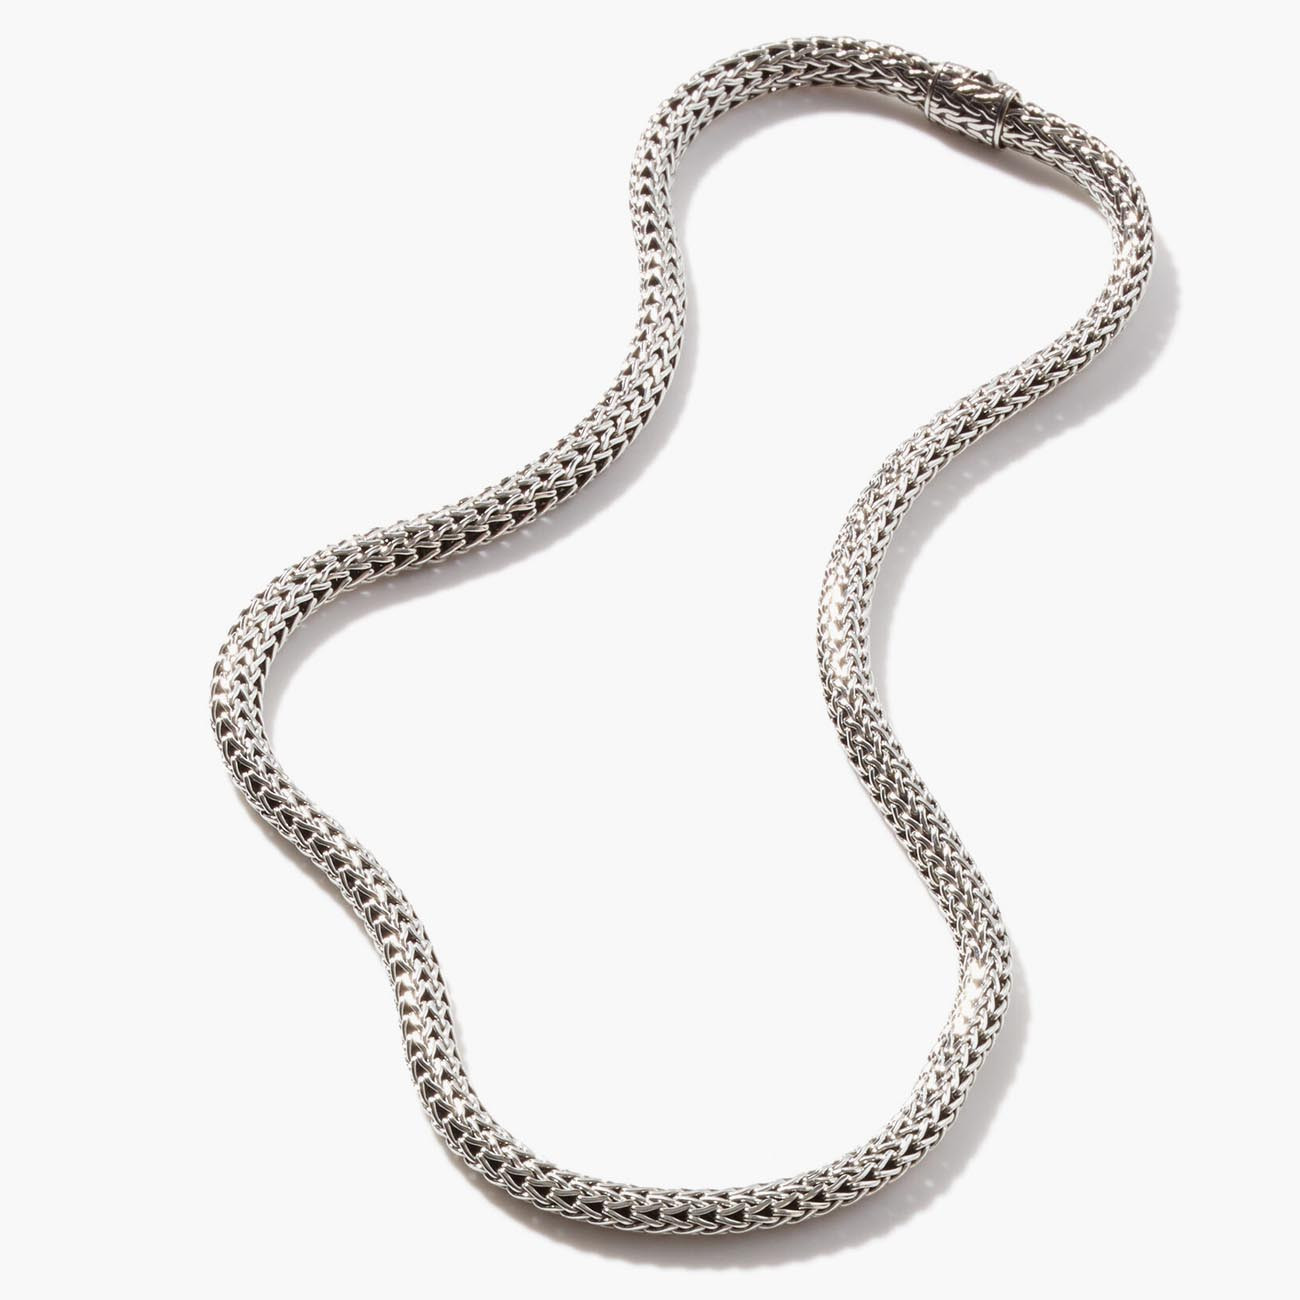 John Hardy Classic Chain 6.5mm Silver Necklace with Chain Clasp